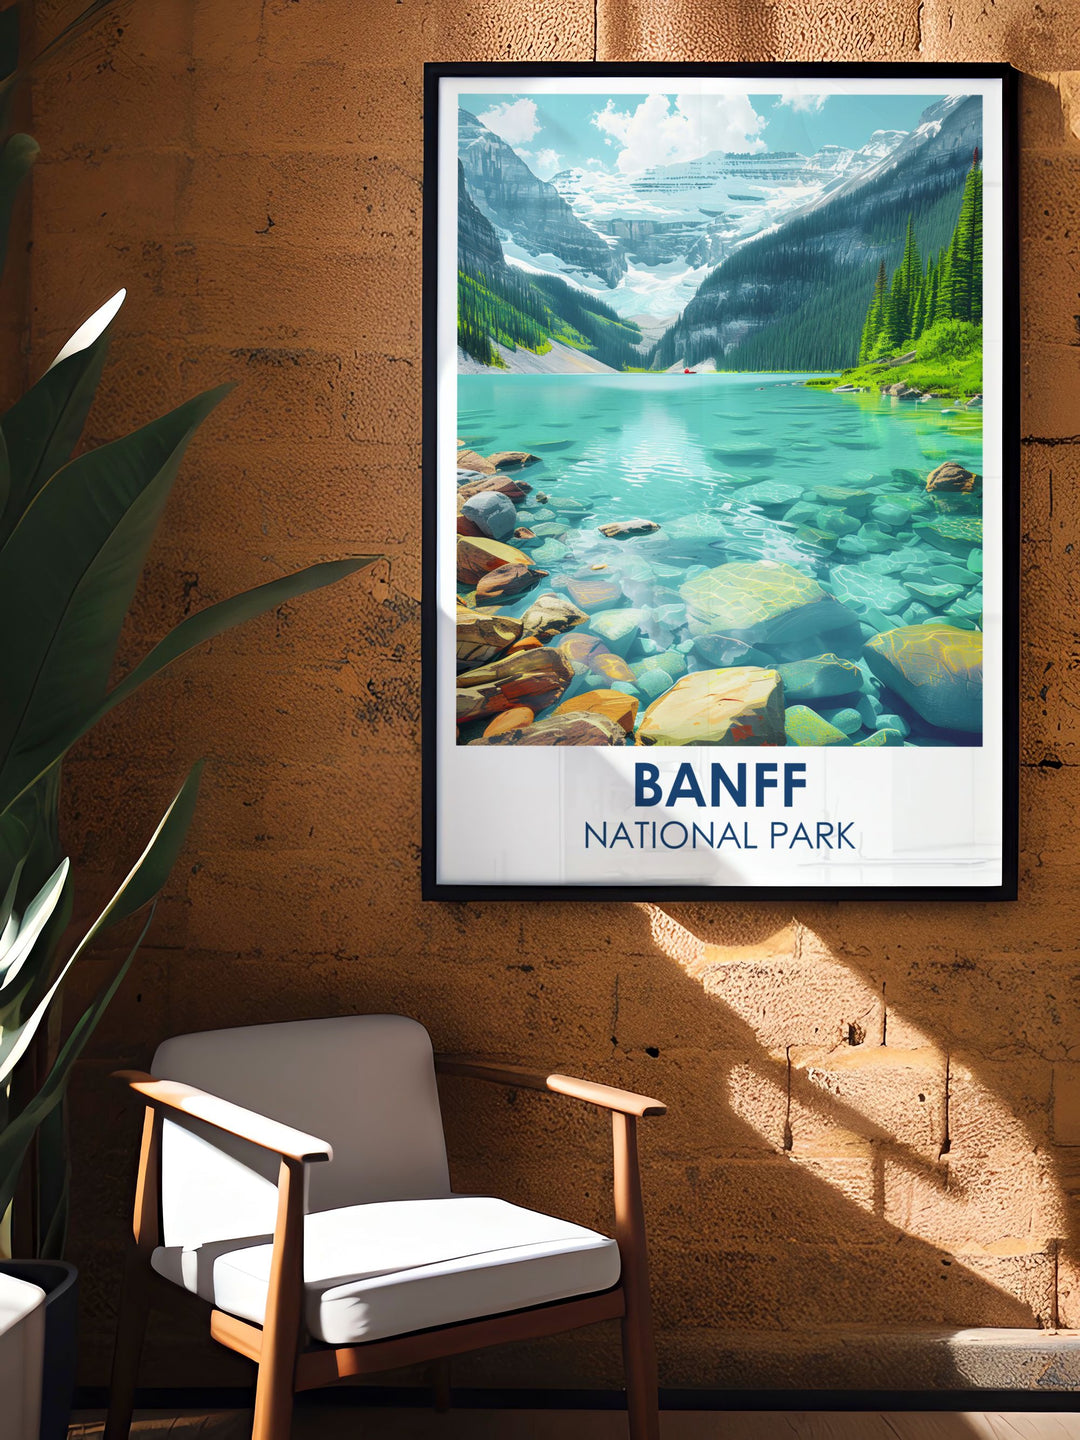 Banff vintage art print that recreates the nostalgic feel of early Canadian tourism, showcasing the exploration and natural beauty of Banff, perfect for those who appreciate historical and artistic representations.